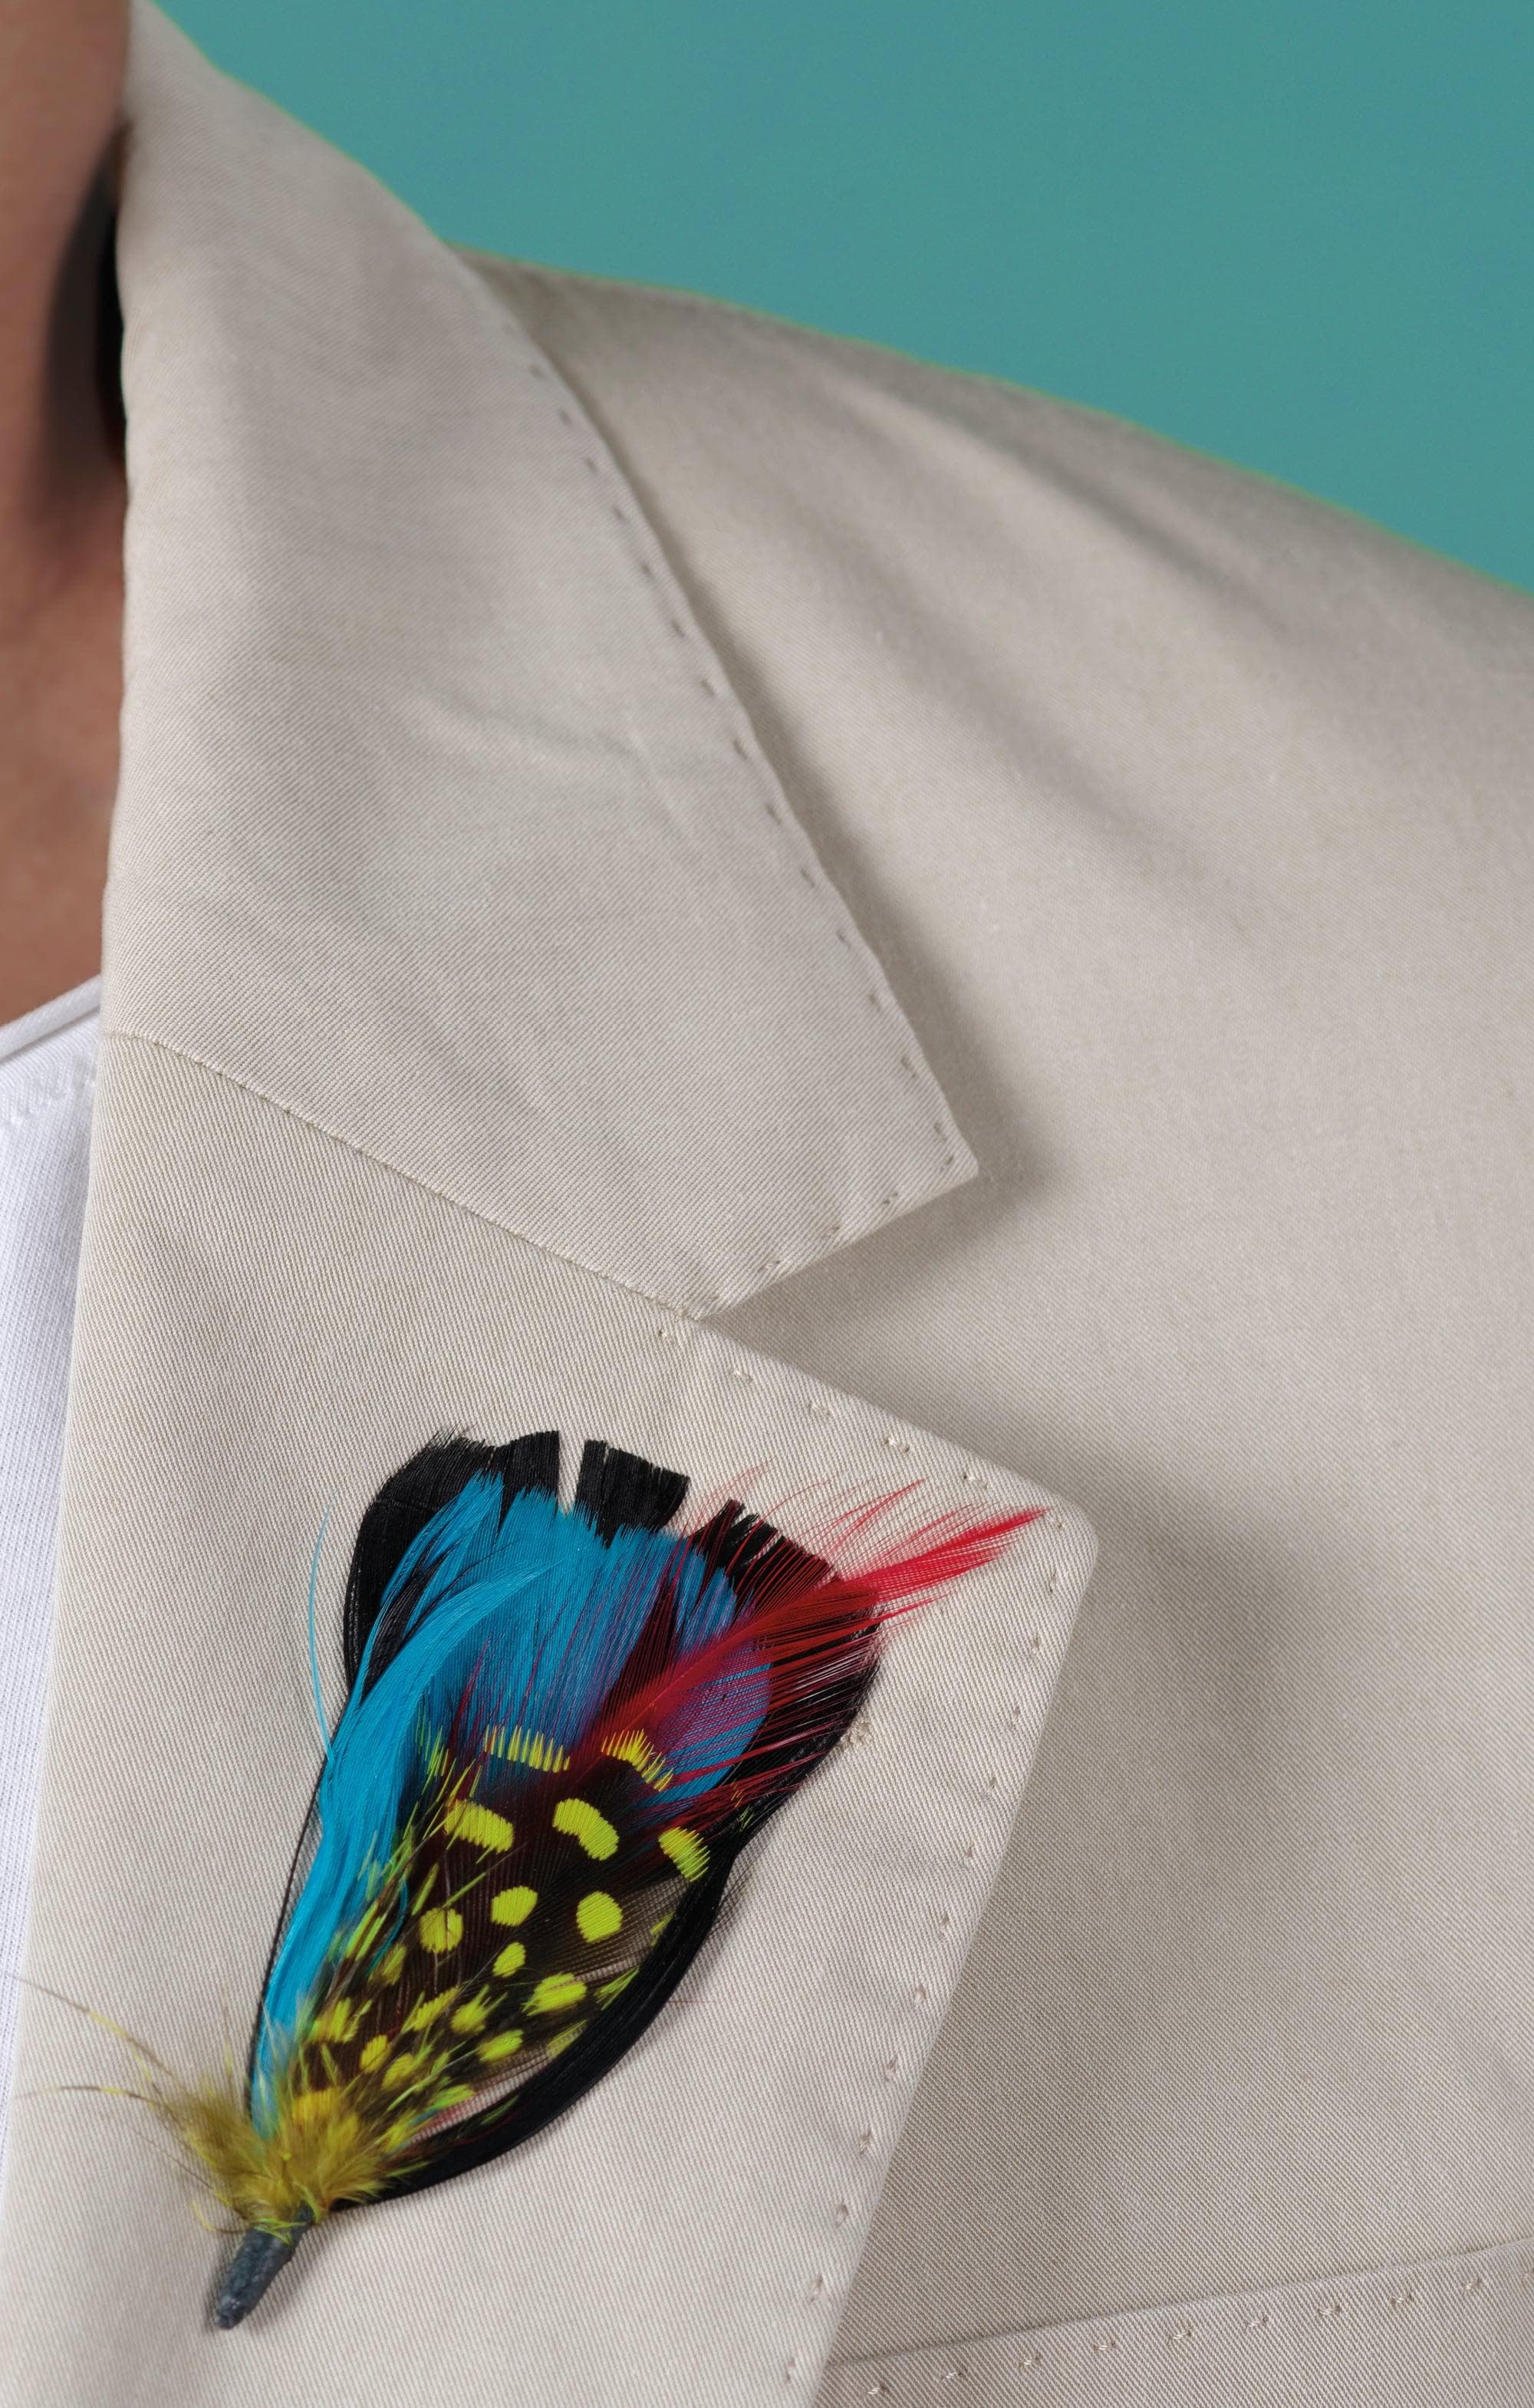 Feathers on lapel